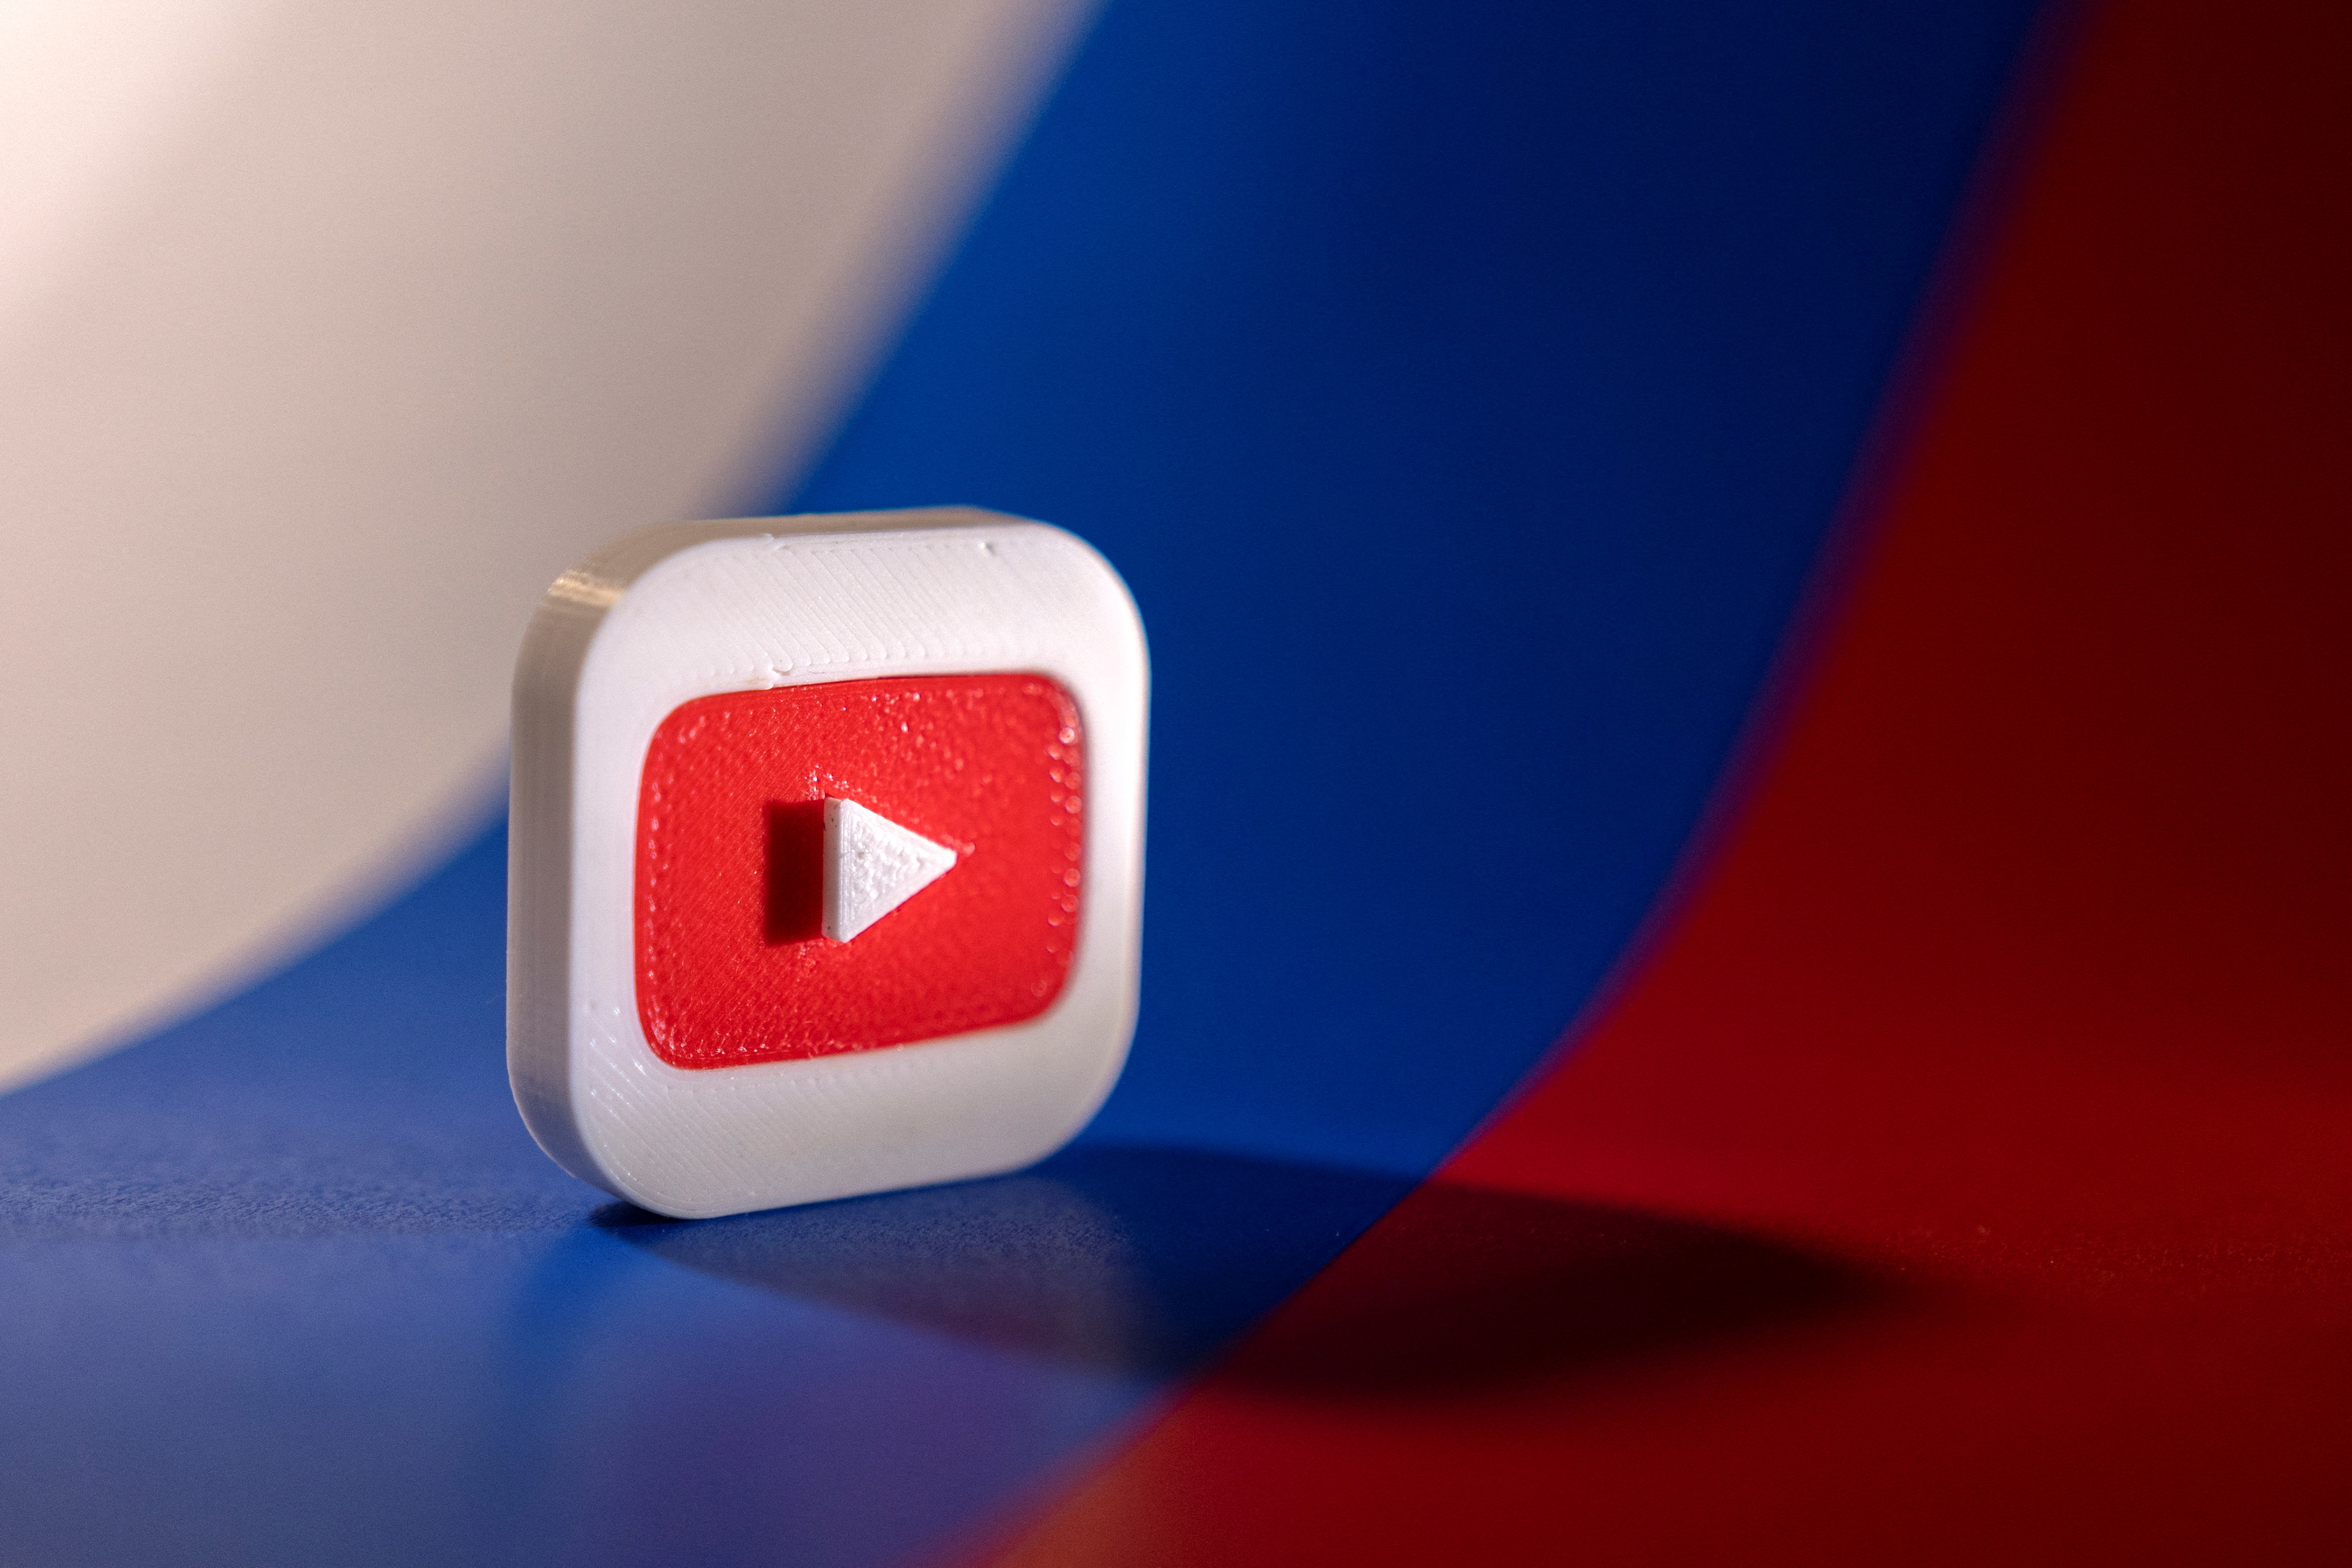 Illustration shows Youtube logo and Russian flag